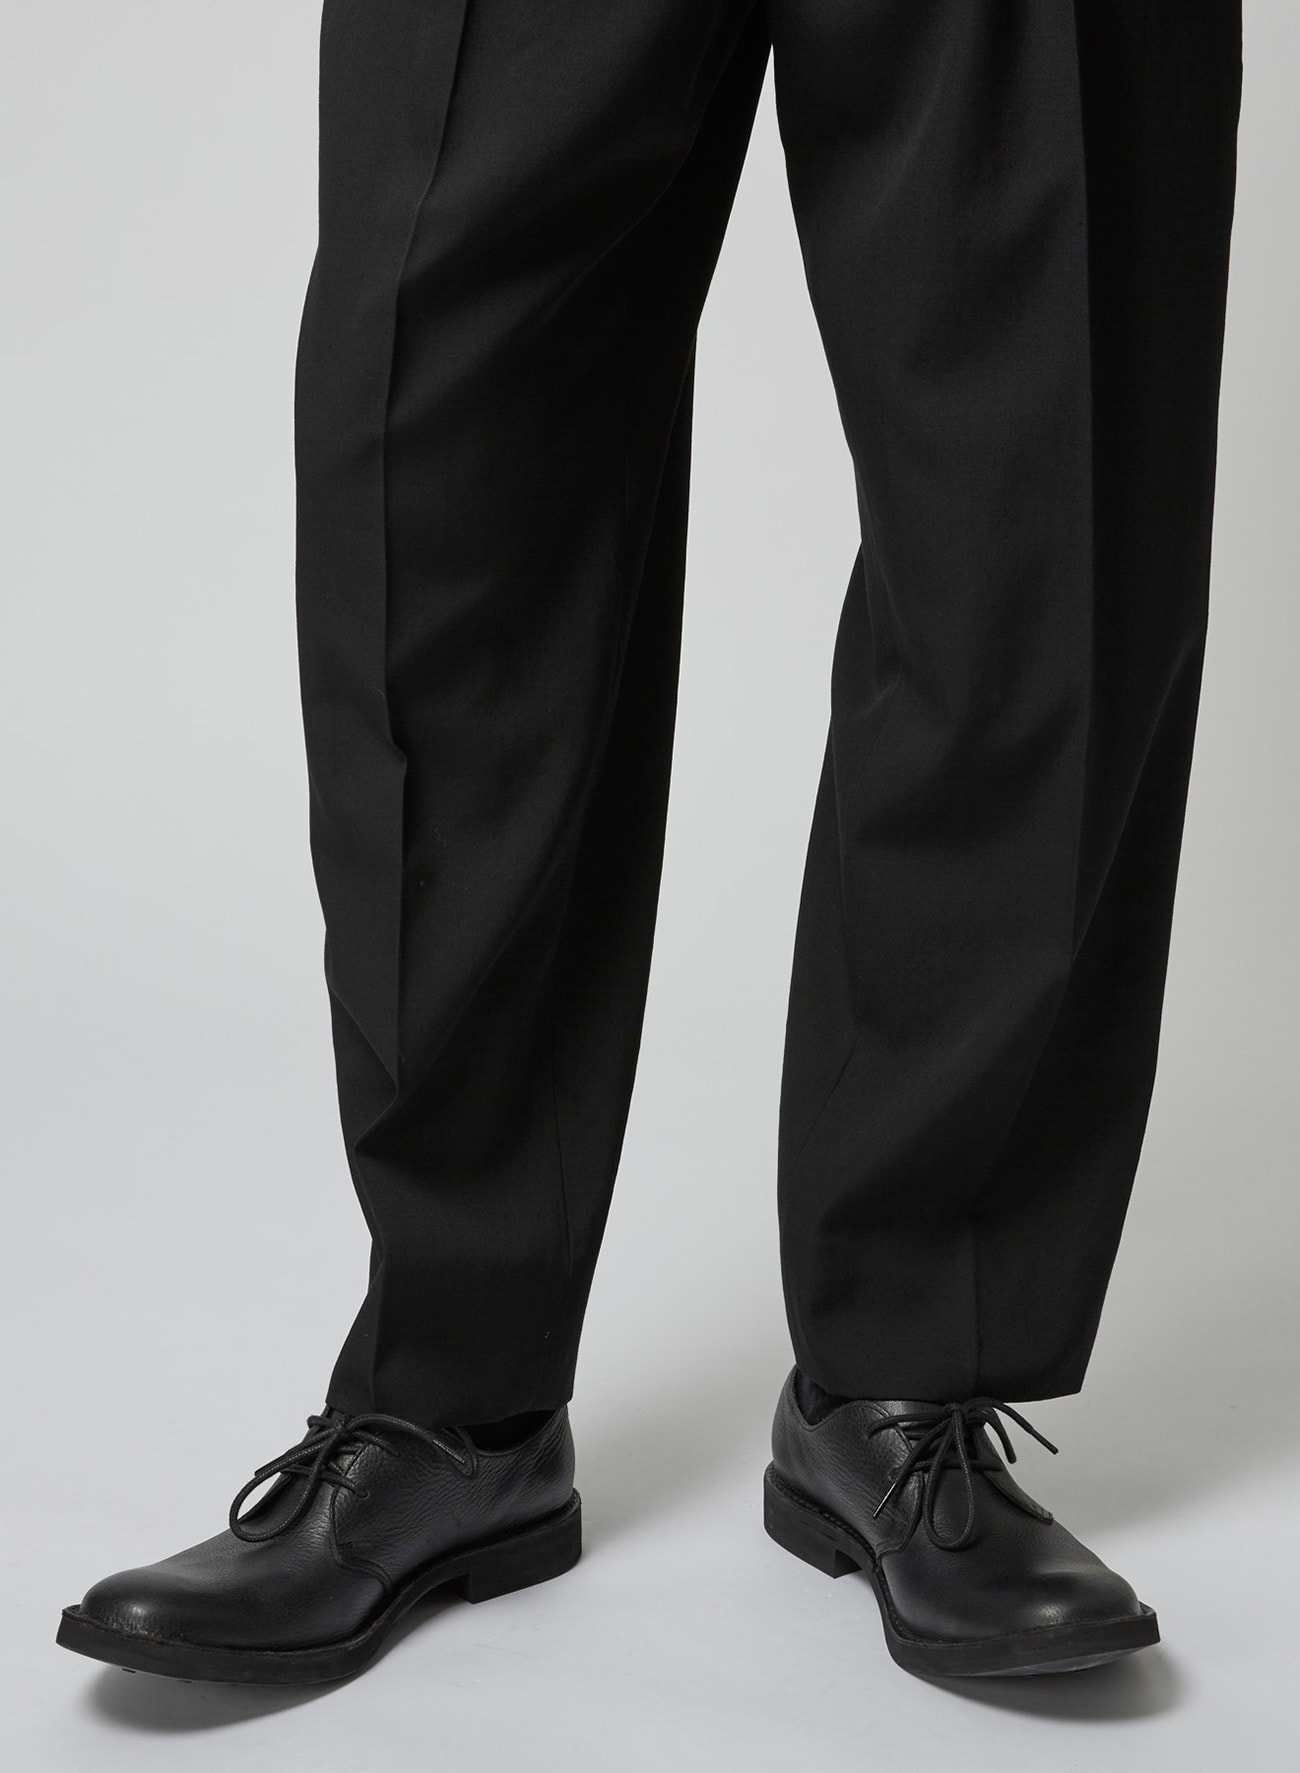 Buy Men's Black Pleat Less Formal Pants for Both Office and